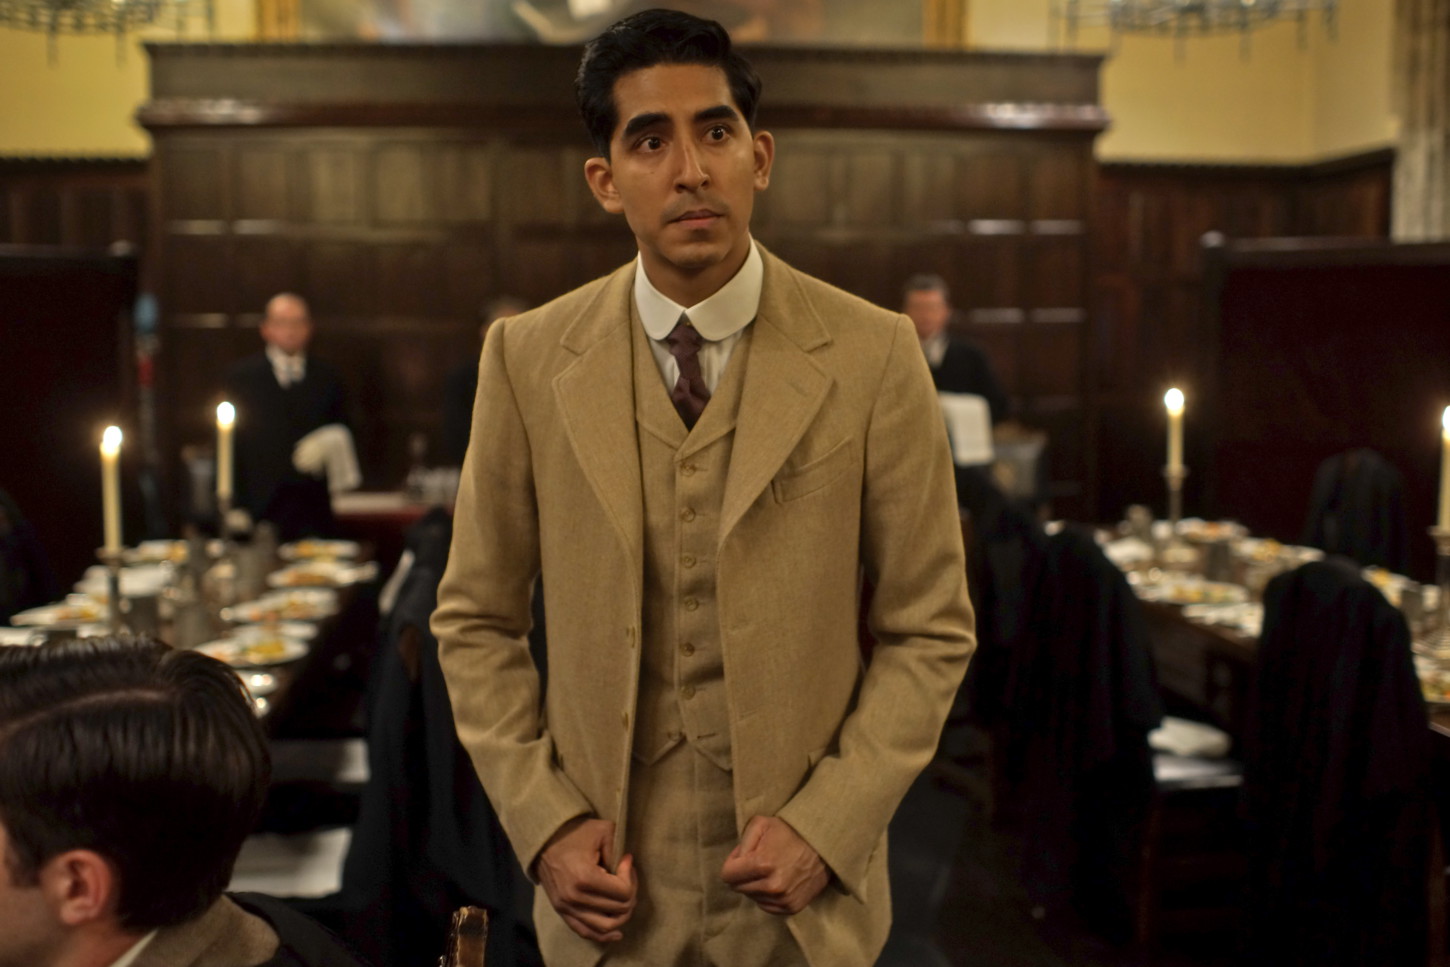 David Patel in "The Man Who Knew Infinity"